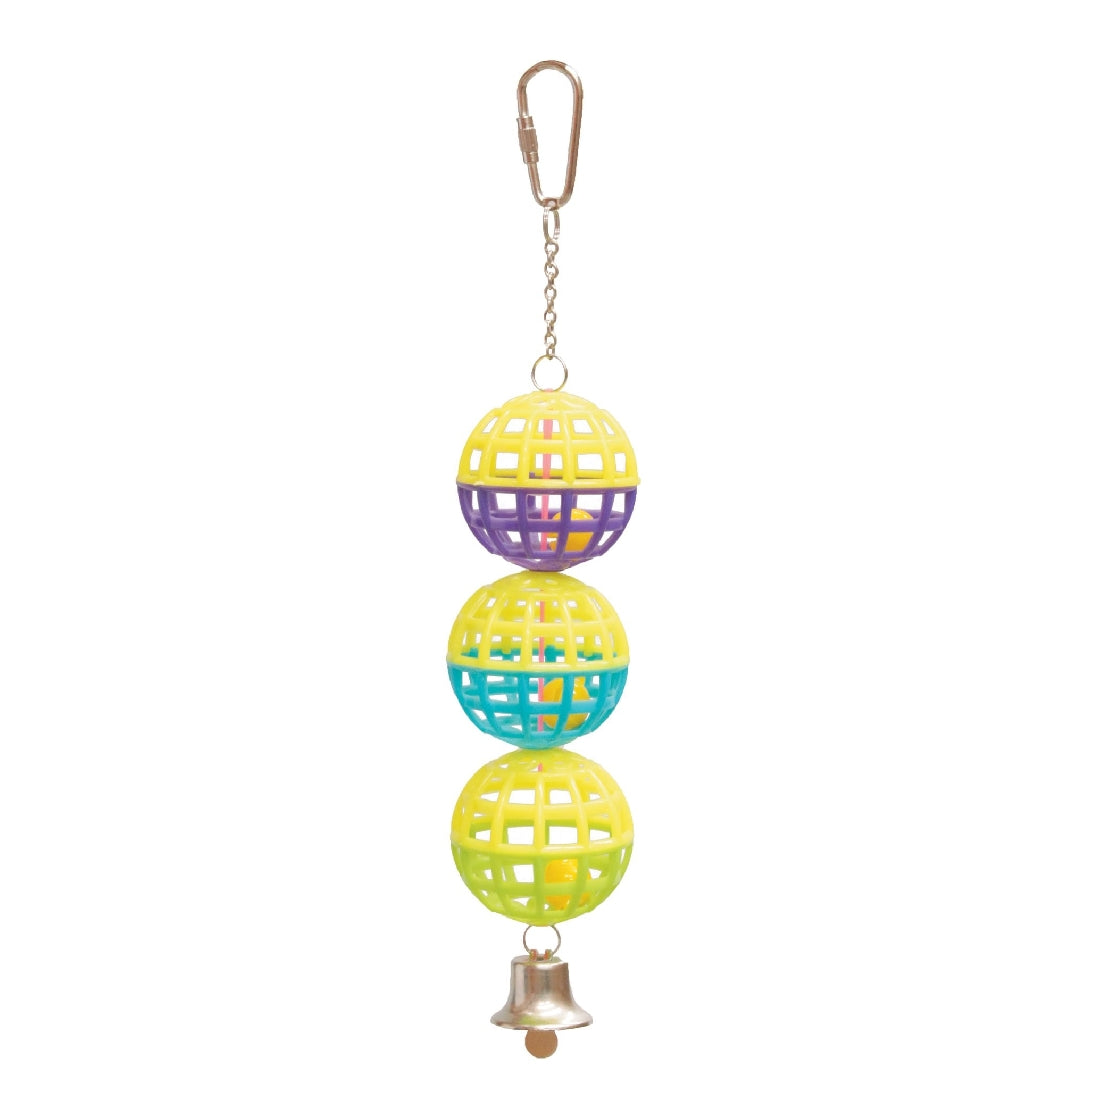 Three colorful plastic spheres with bell bird toy on white background.